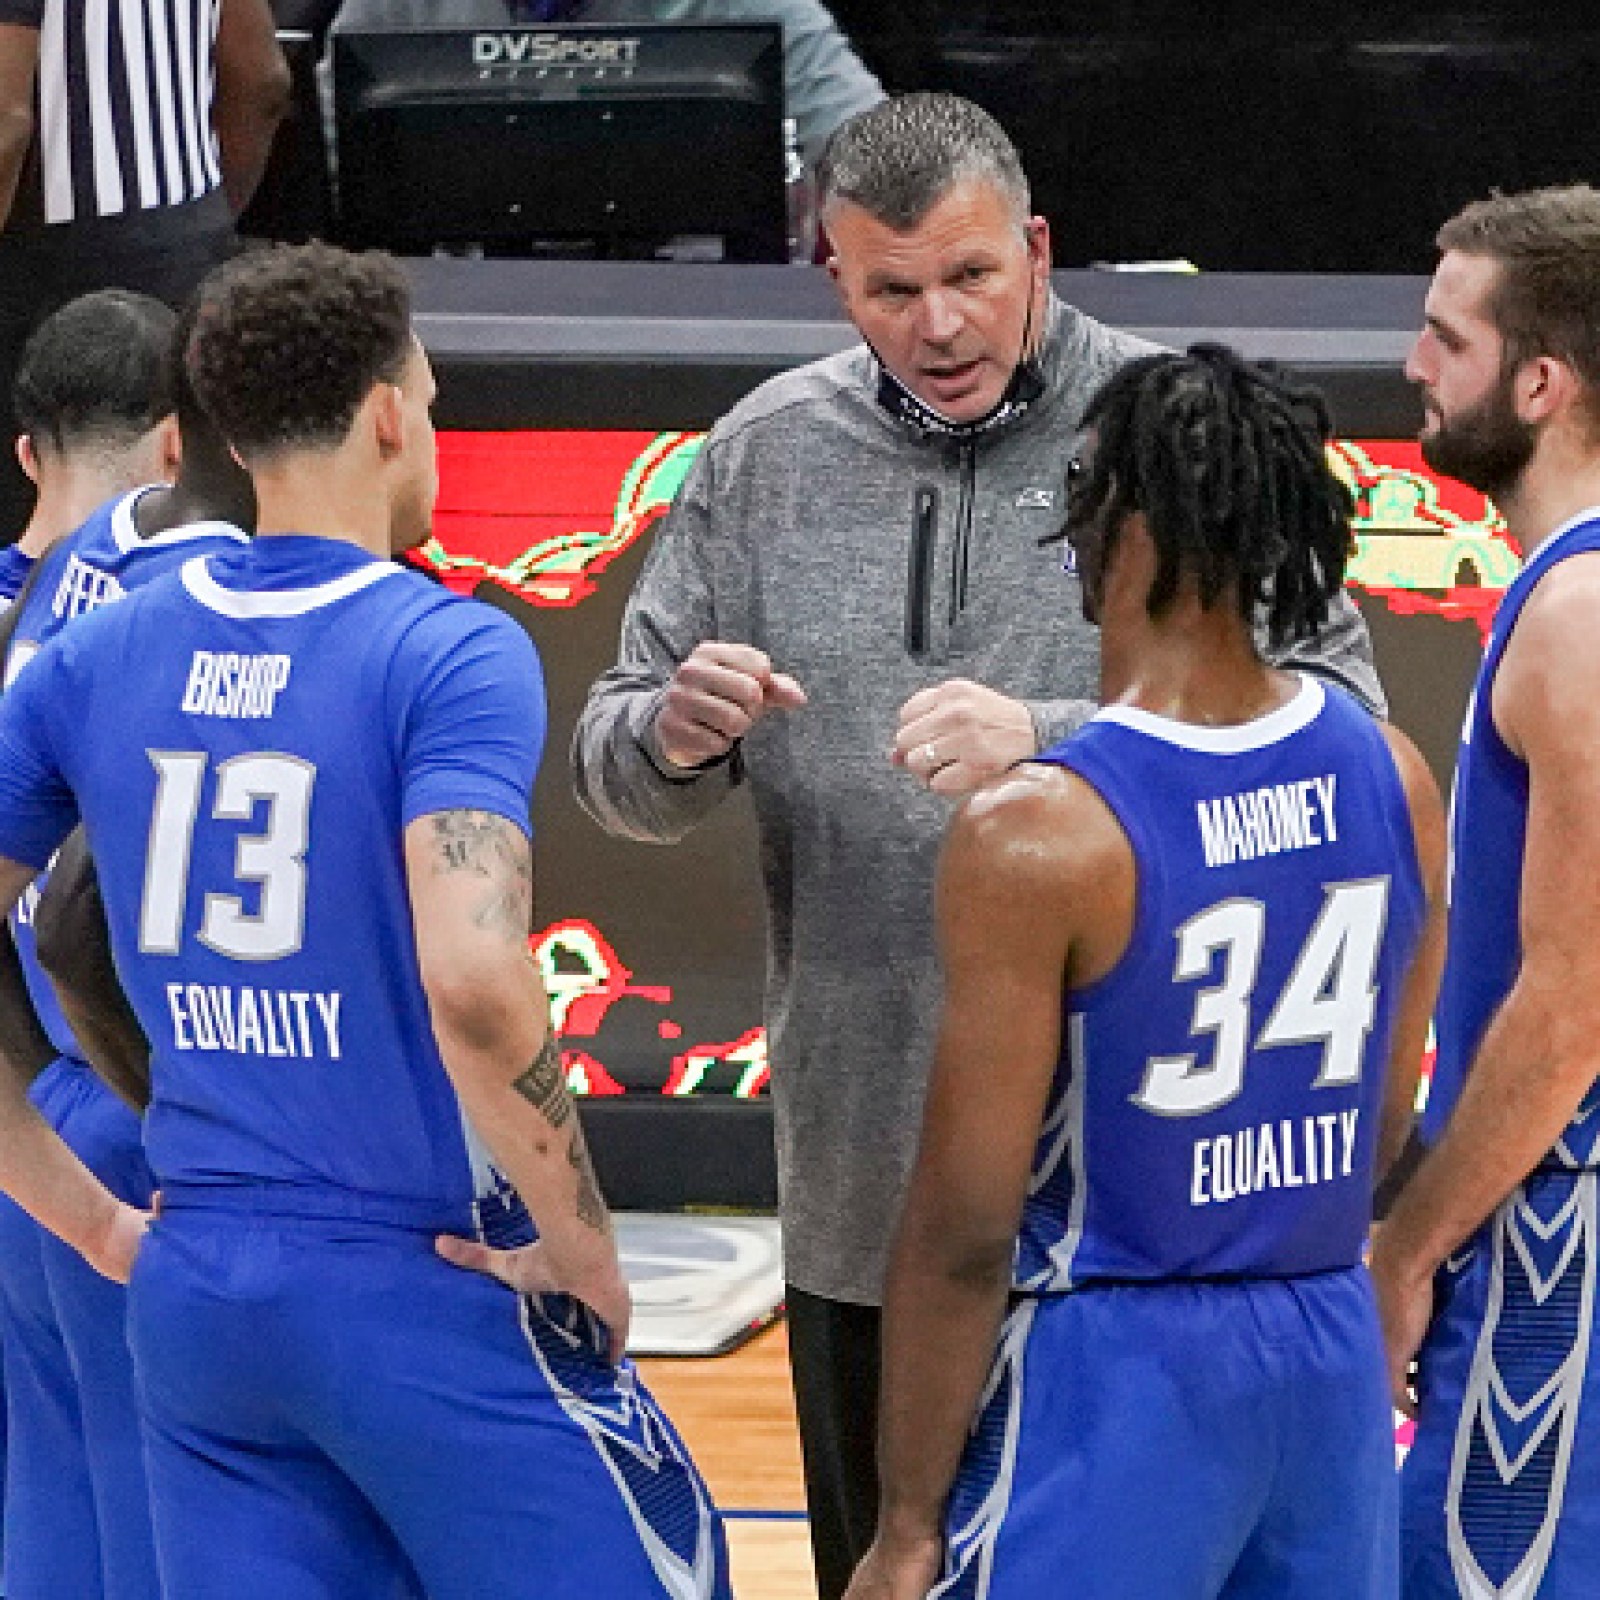 College Basketball Coach Regrets 'Plantation' Remarks After Team's Loss